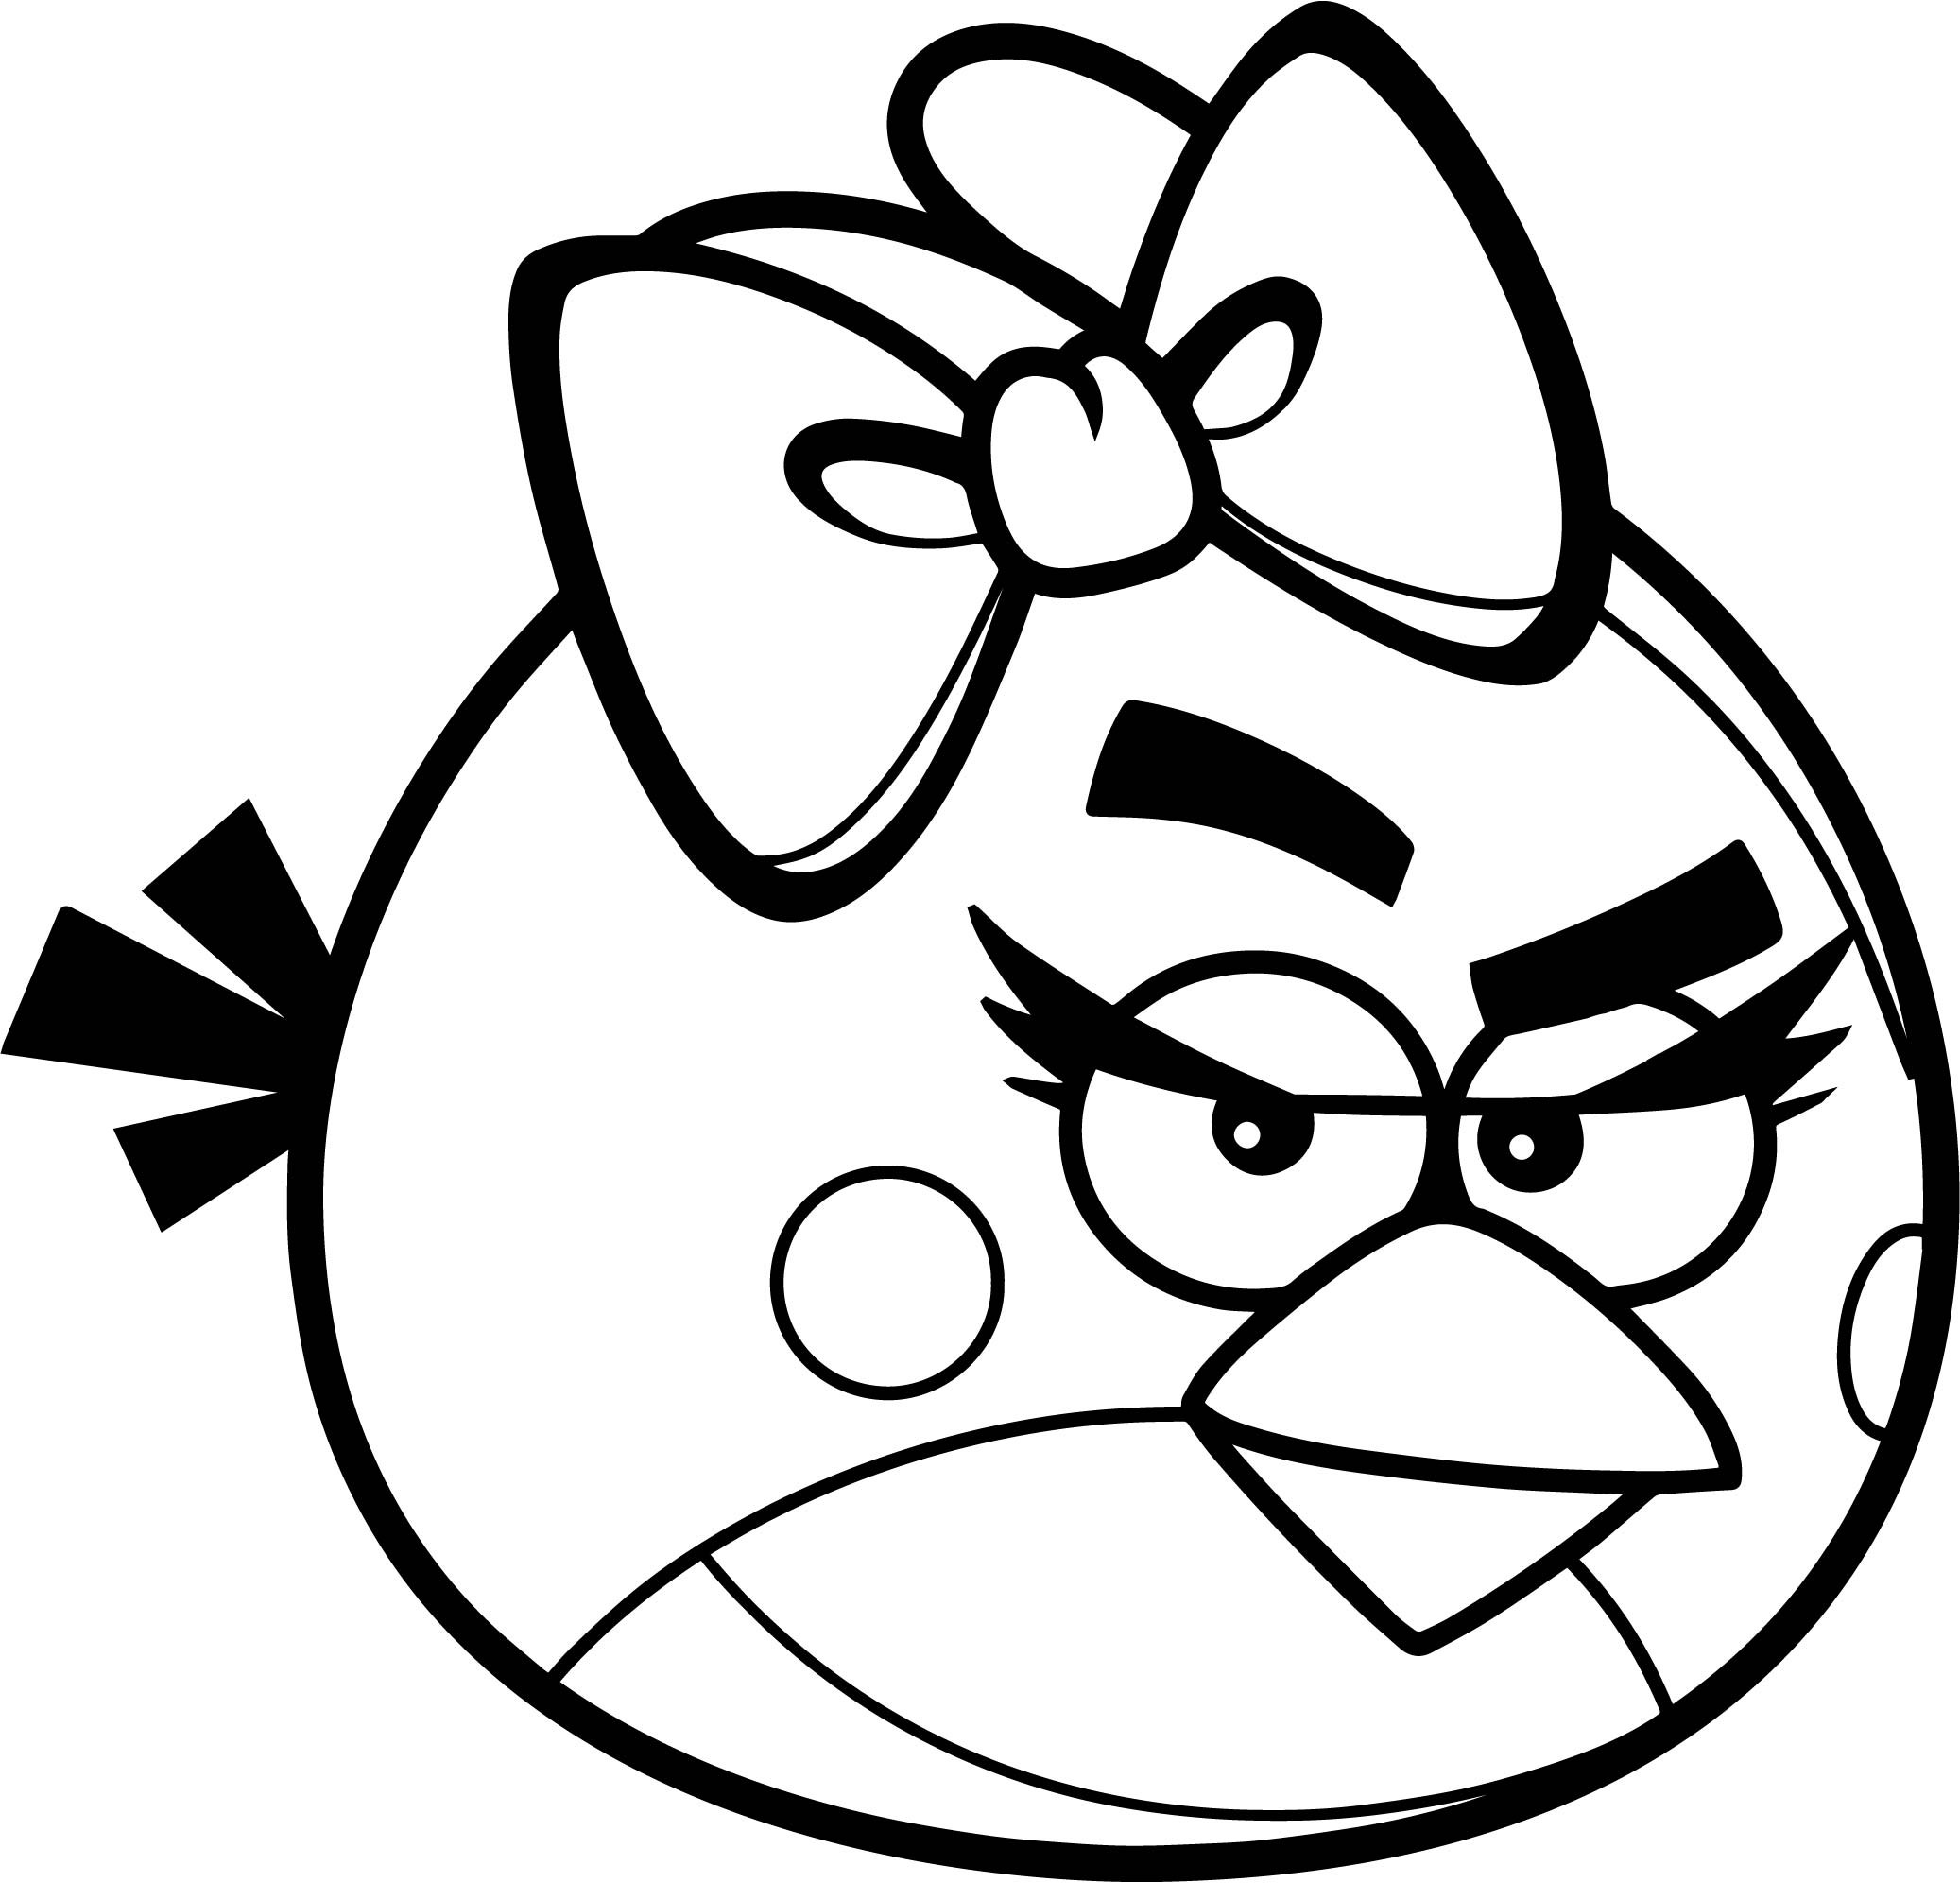 Girl Angry Birds Coloring Pages
 Angry Bird Red Girl Coloring Page